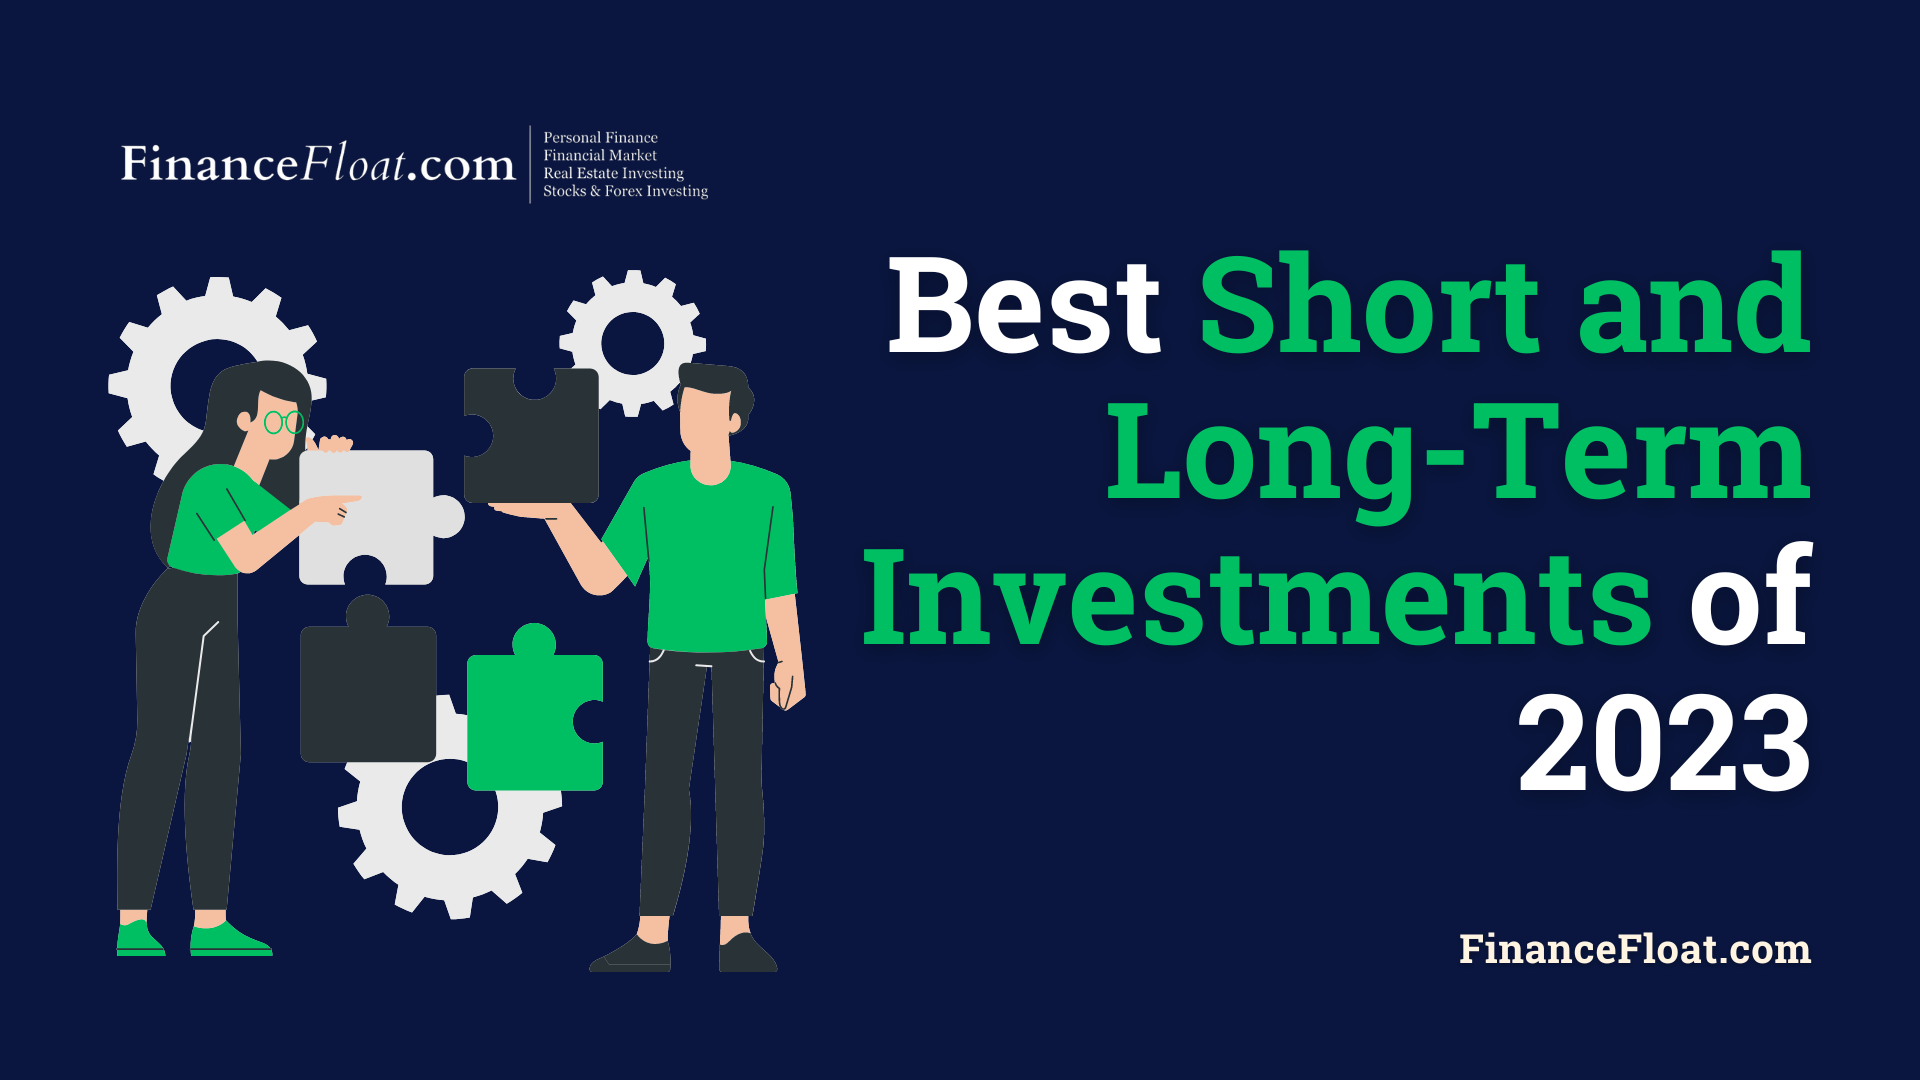 Best Short and Long-Term Investments of 2023